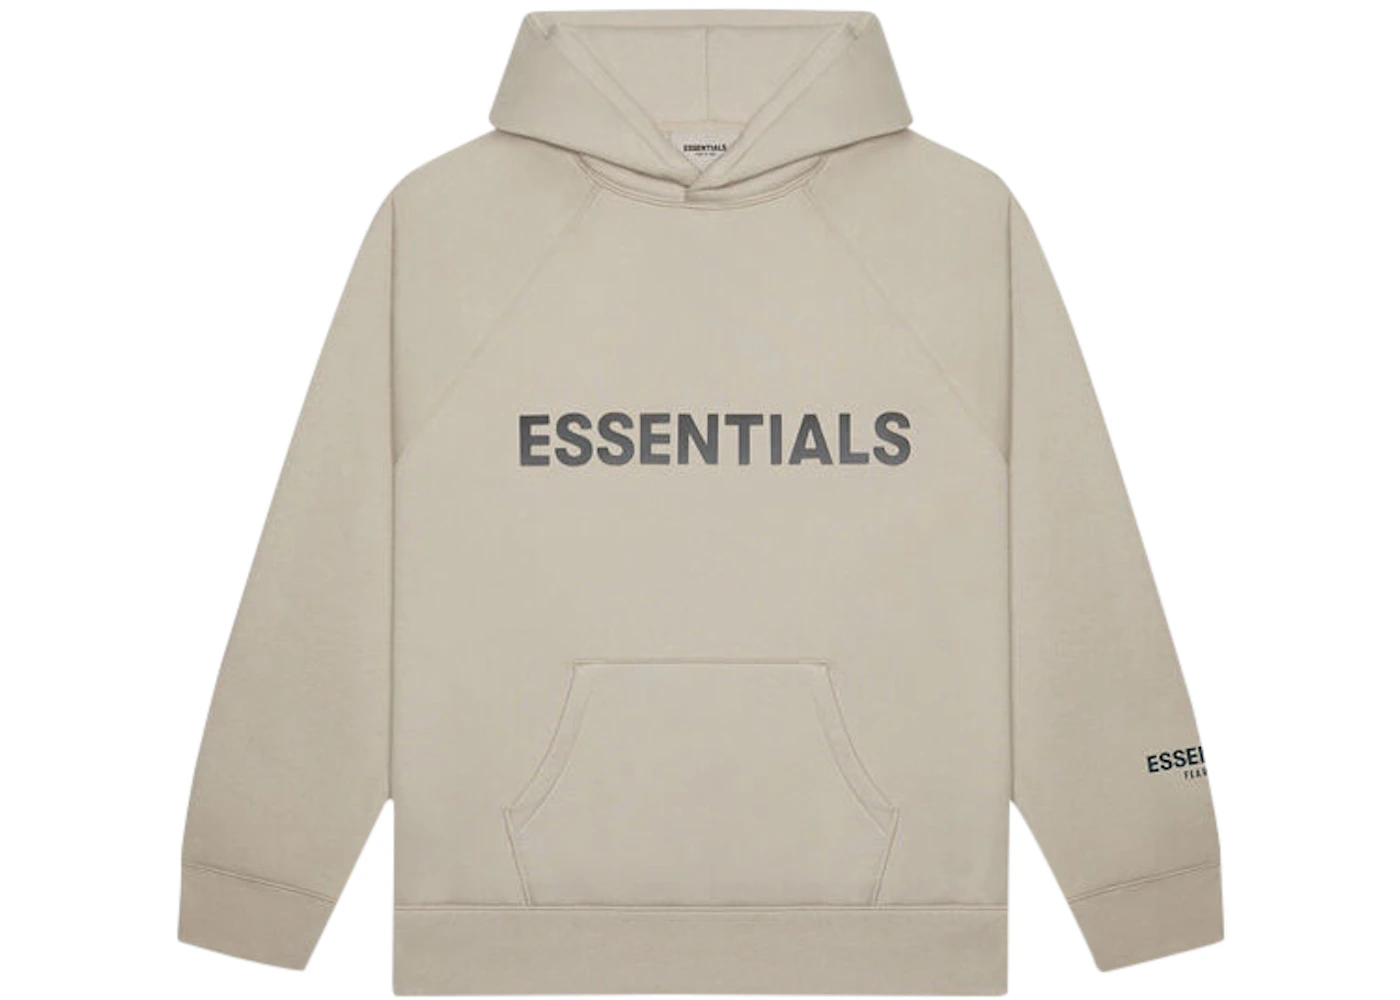 FEAR OF GOD ESSENTIALS 3D Silicon Applique Pullover Hoodie String